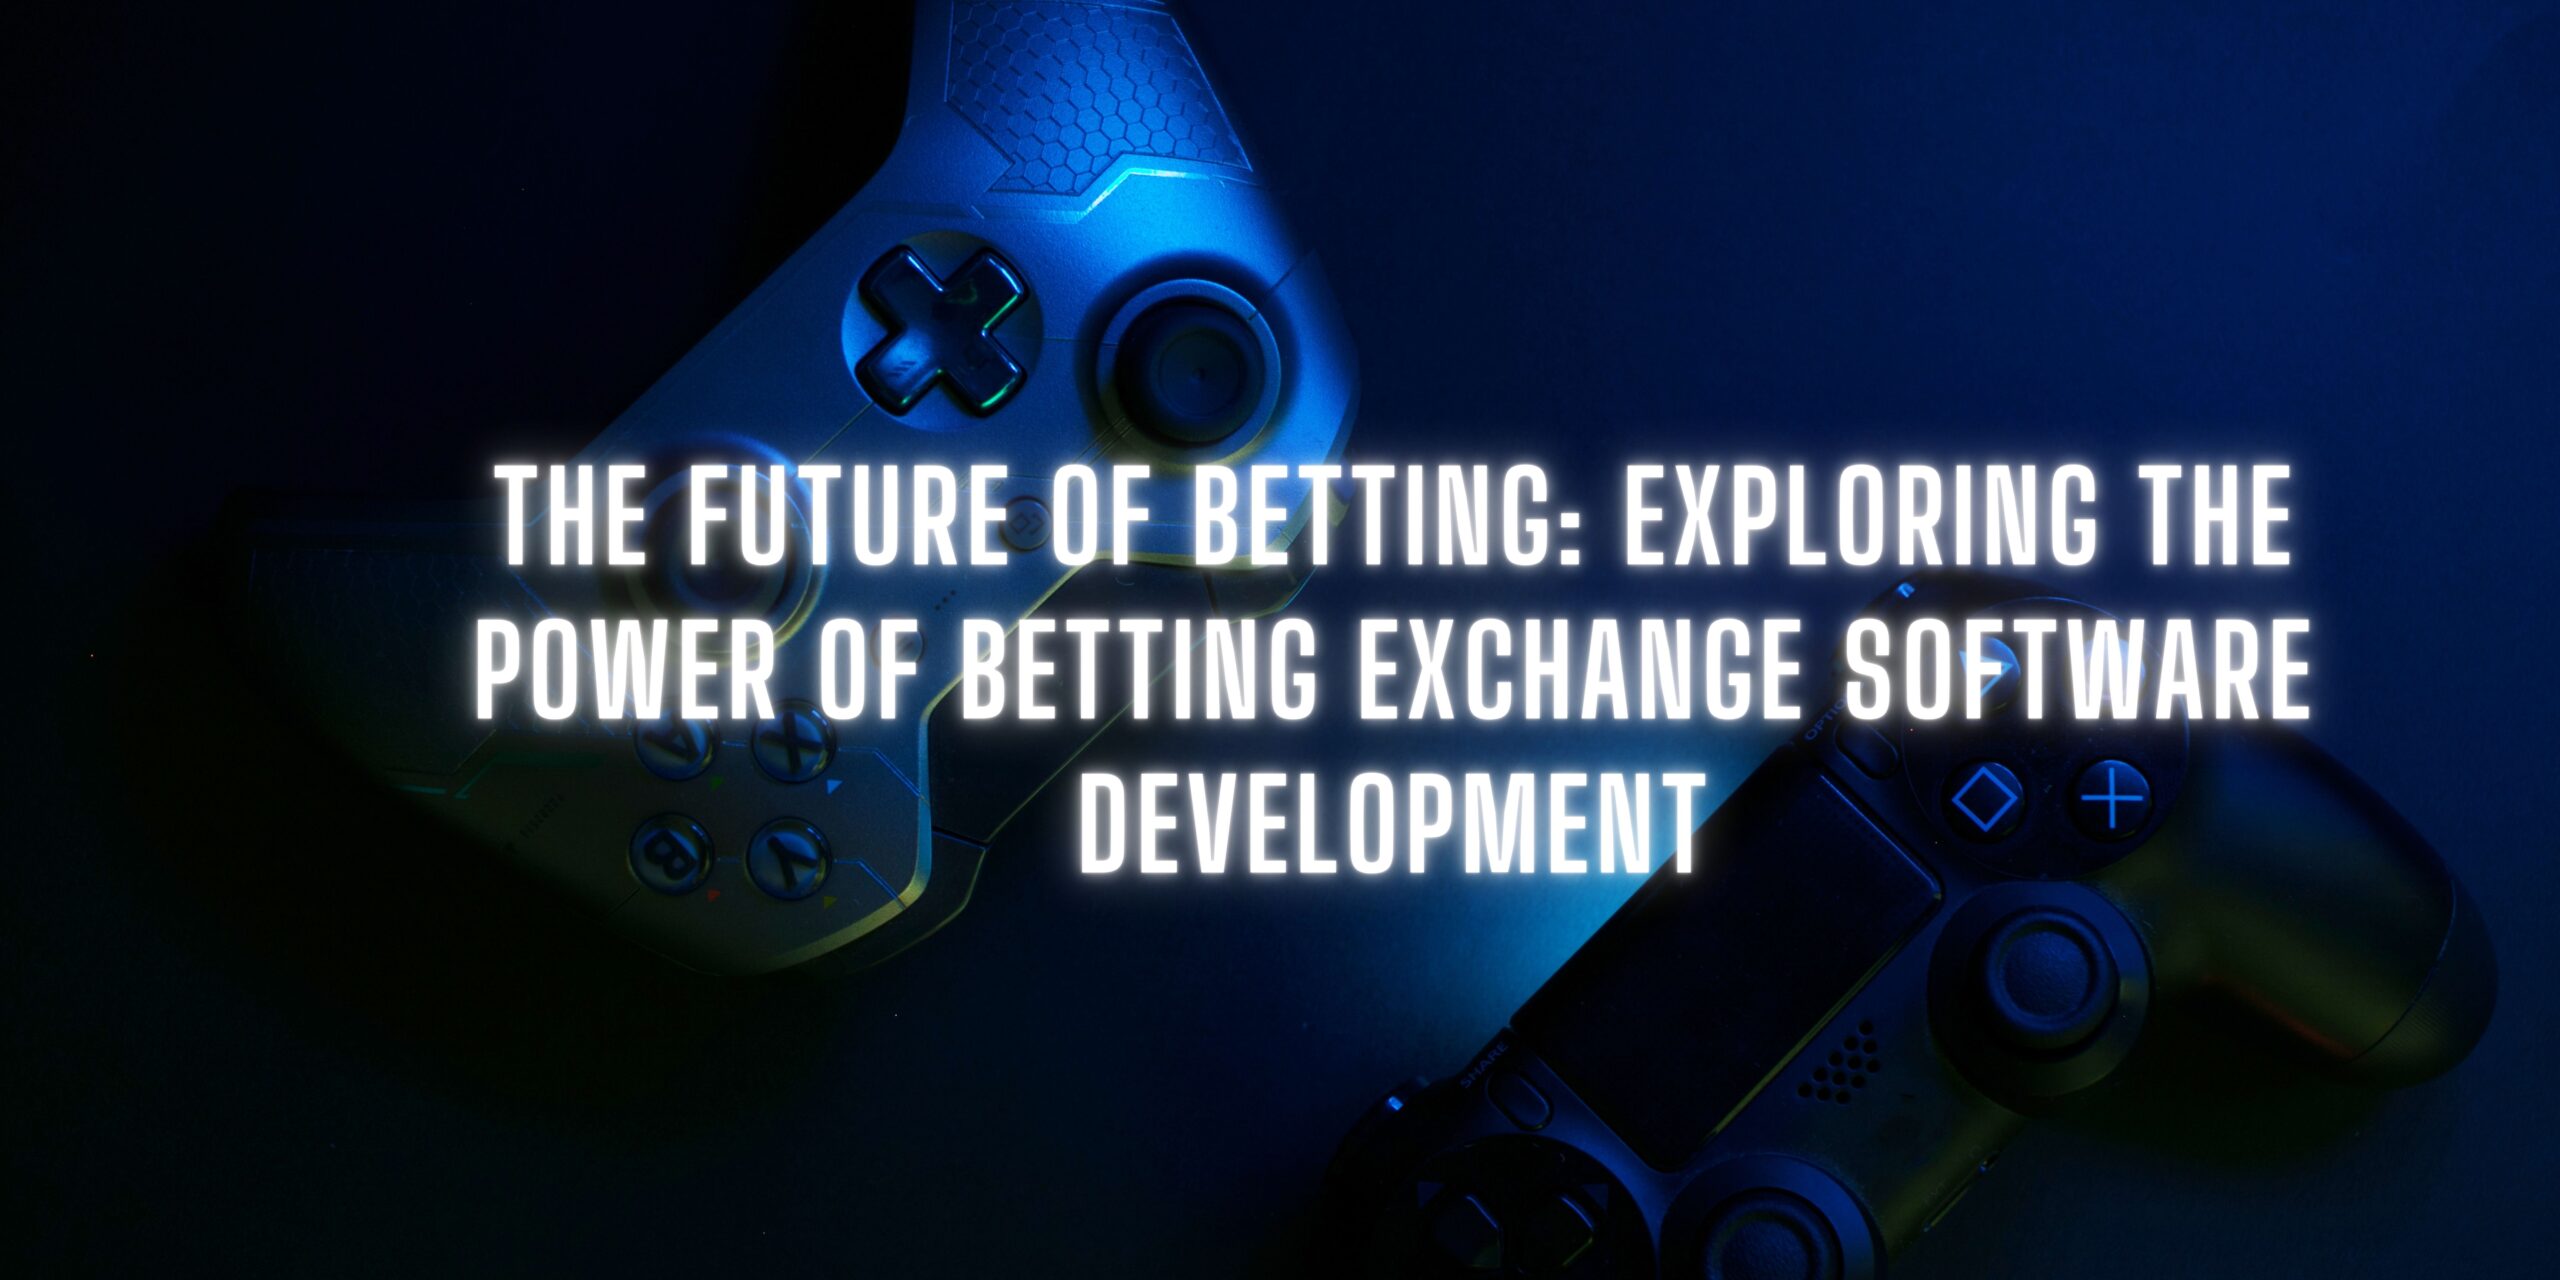 The Future of Betting: Exploring the Power of Betting Exchange Software Development